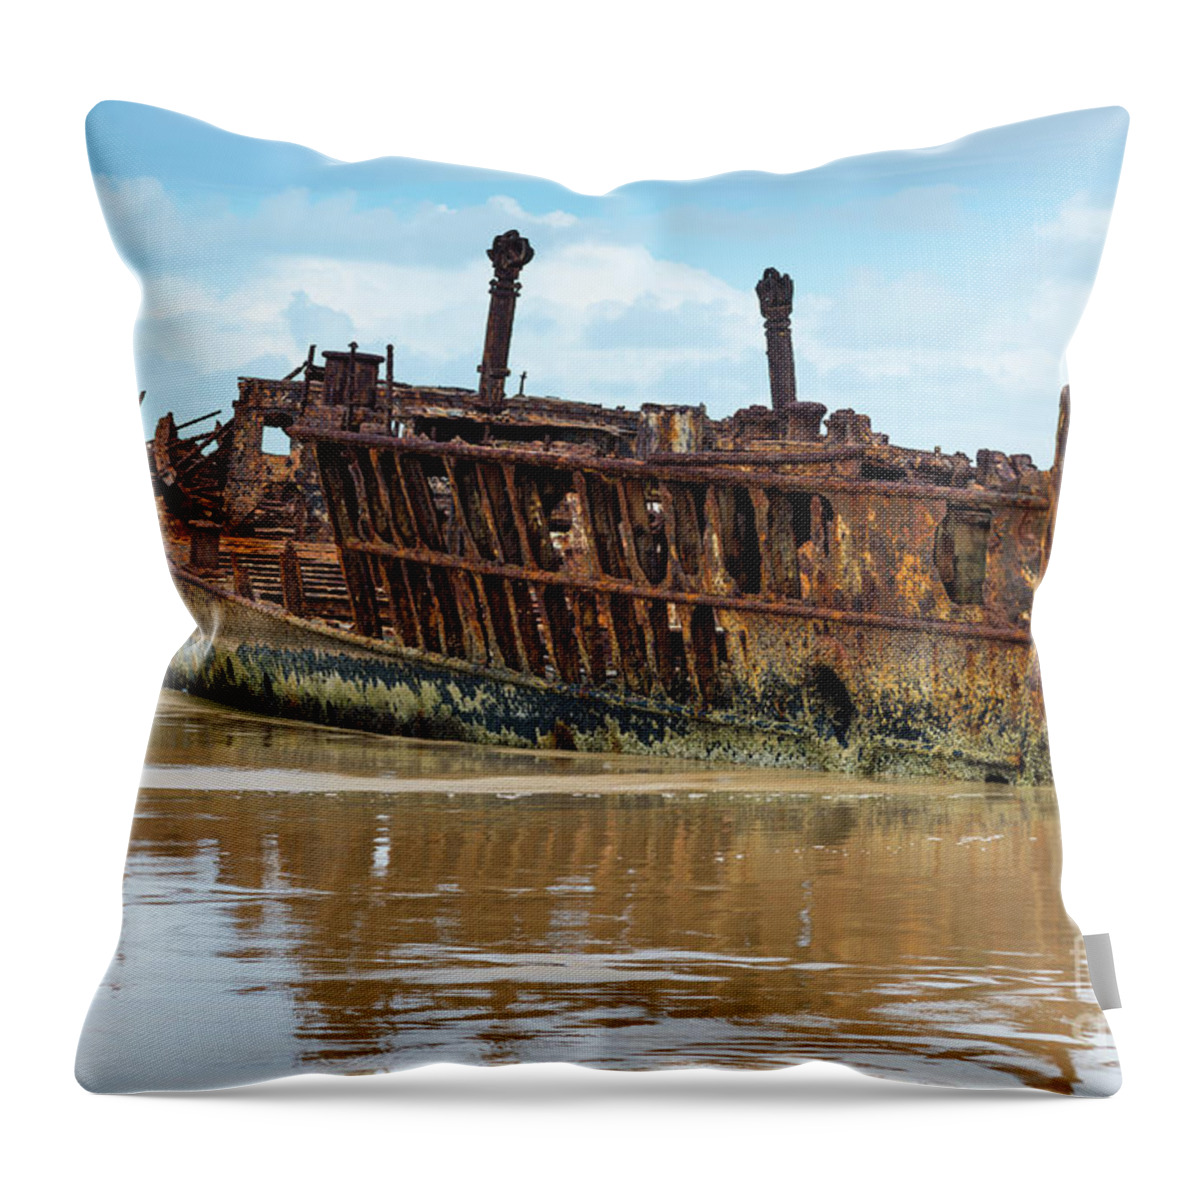 2017 Throw Pillow featuring the photograph Maheno Shipwreck #1 by Andrew Michael